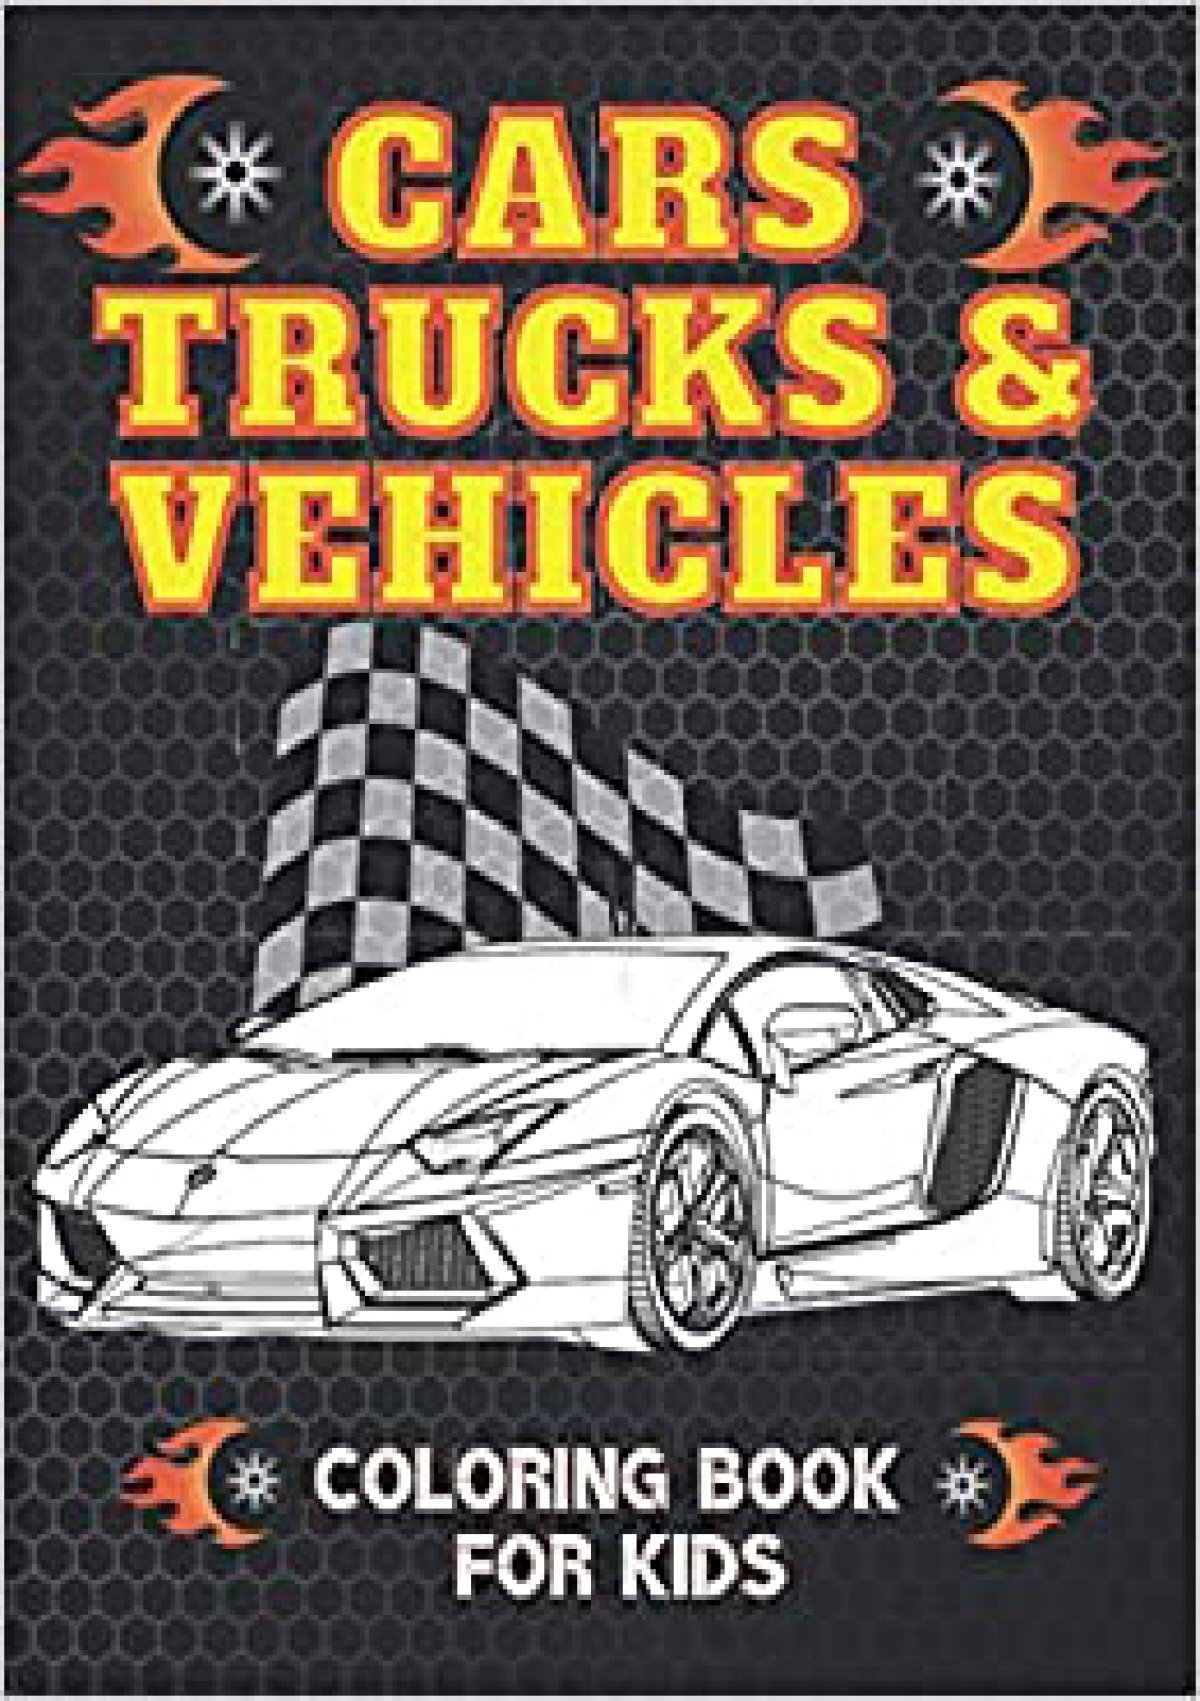 Download Pdf Download Cars Trucks And Vehicles Coloring Book For Kids Fun And Theme Based Coloring Book For Early Learning And Relaxing For Preschoolers And Kids Aged 4 8 Gift For Boys And Girls